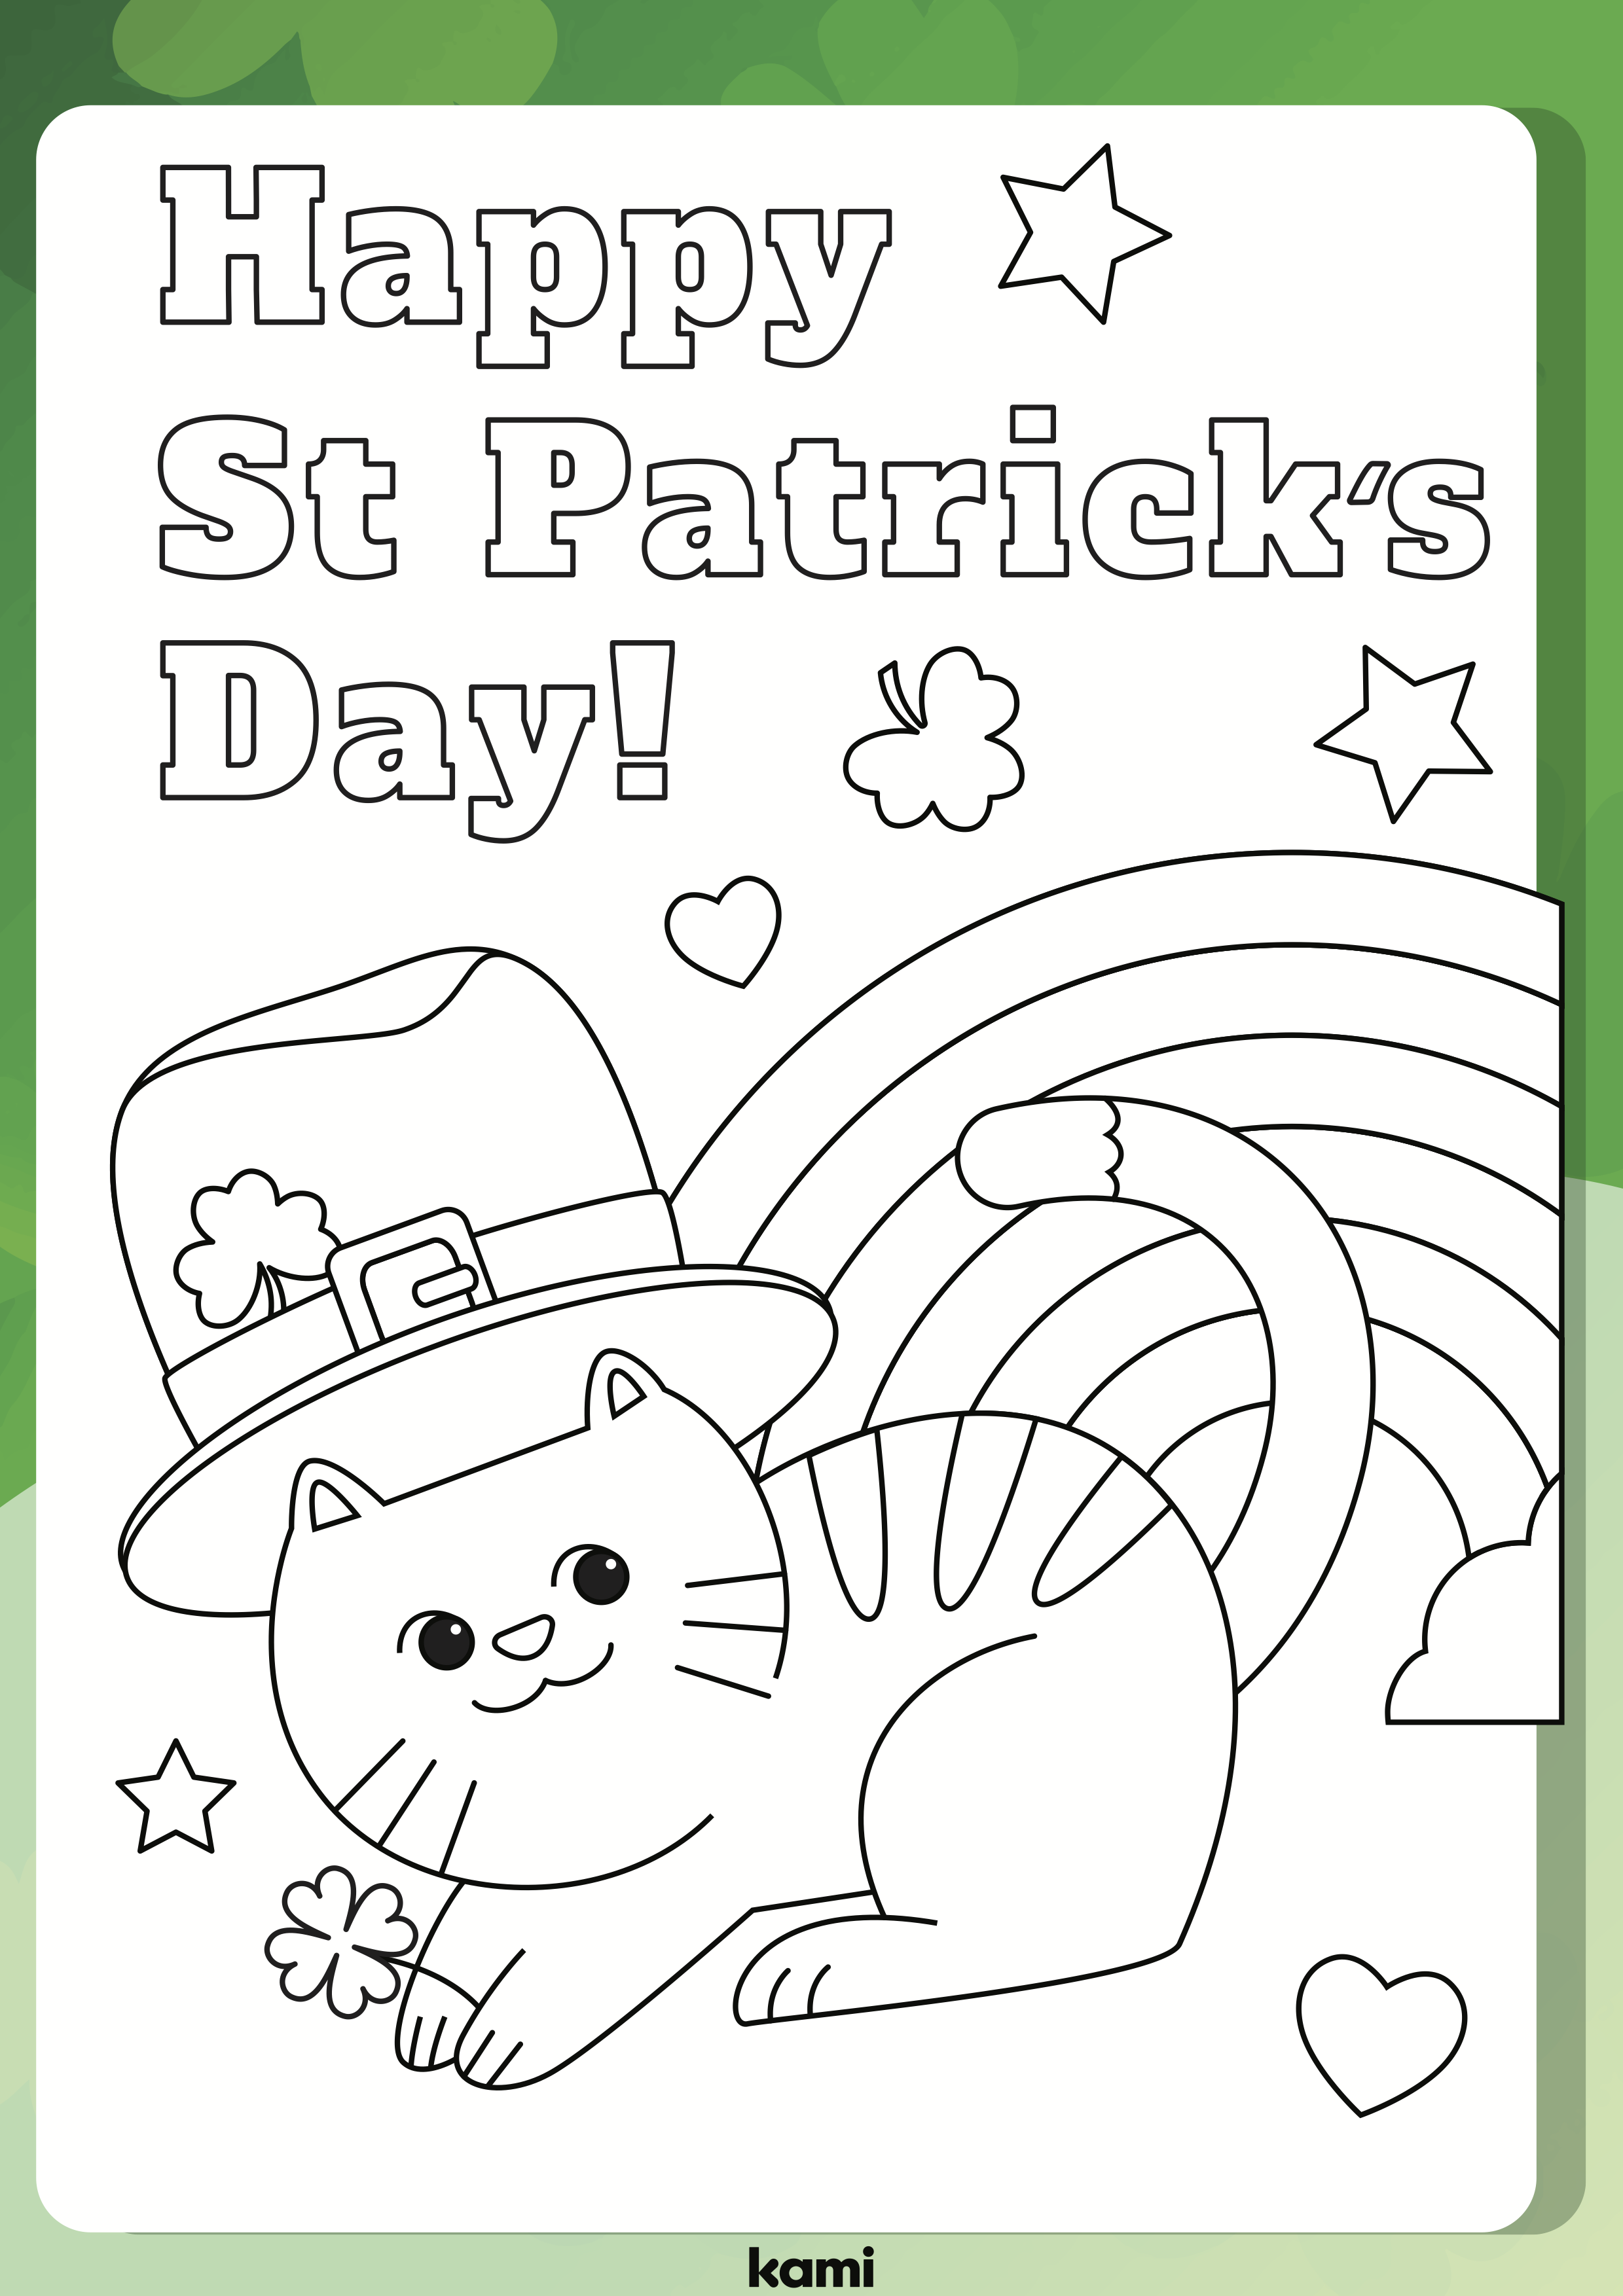 St patricks day coloring sheet cat for teachers perfect for grades st nd rd k pre k other classroom resources kami library